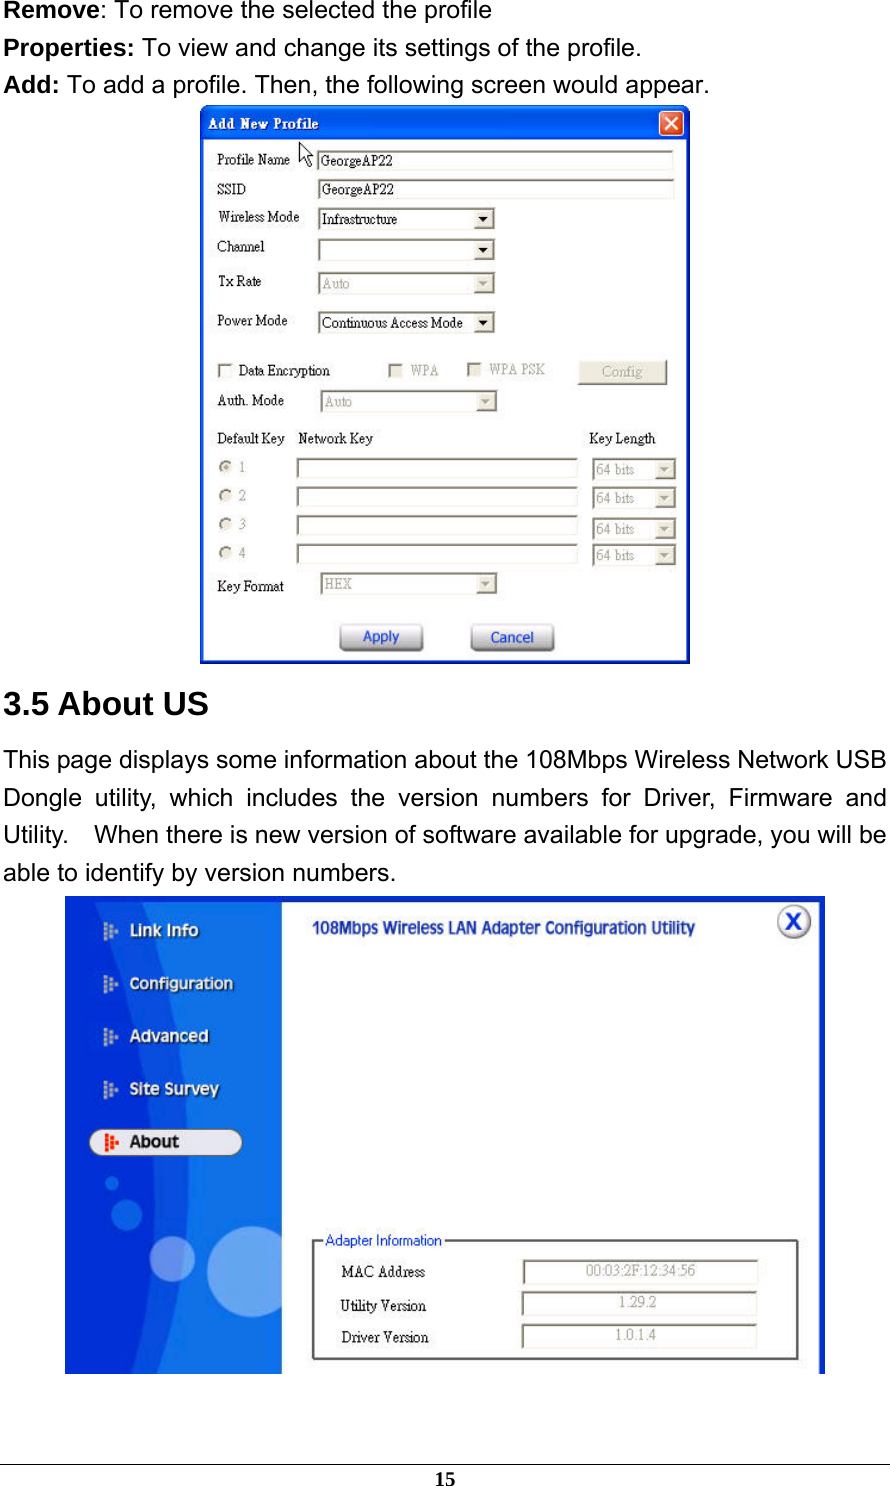  Remove: To remove the selected the profile Properties: To view and change its settings of the profile. Add: To add a profile. Then, the following screen would appear.  3.5 About US This page displays some information about the 108Mbps Wireless Network USB Dongle utility, which includes the version numbers for Driver, Firmware and Utility.    When there is new version of software available for upgrade, you will be able to identify by version numbers.  15 